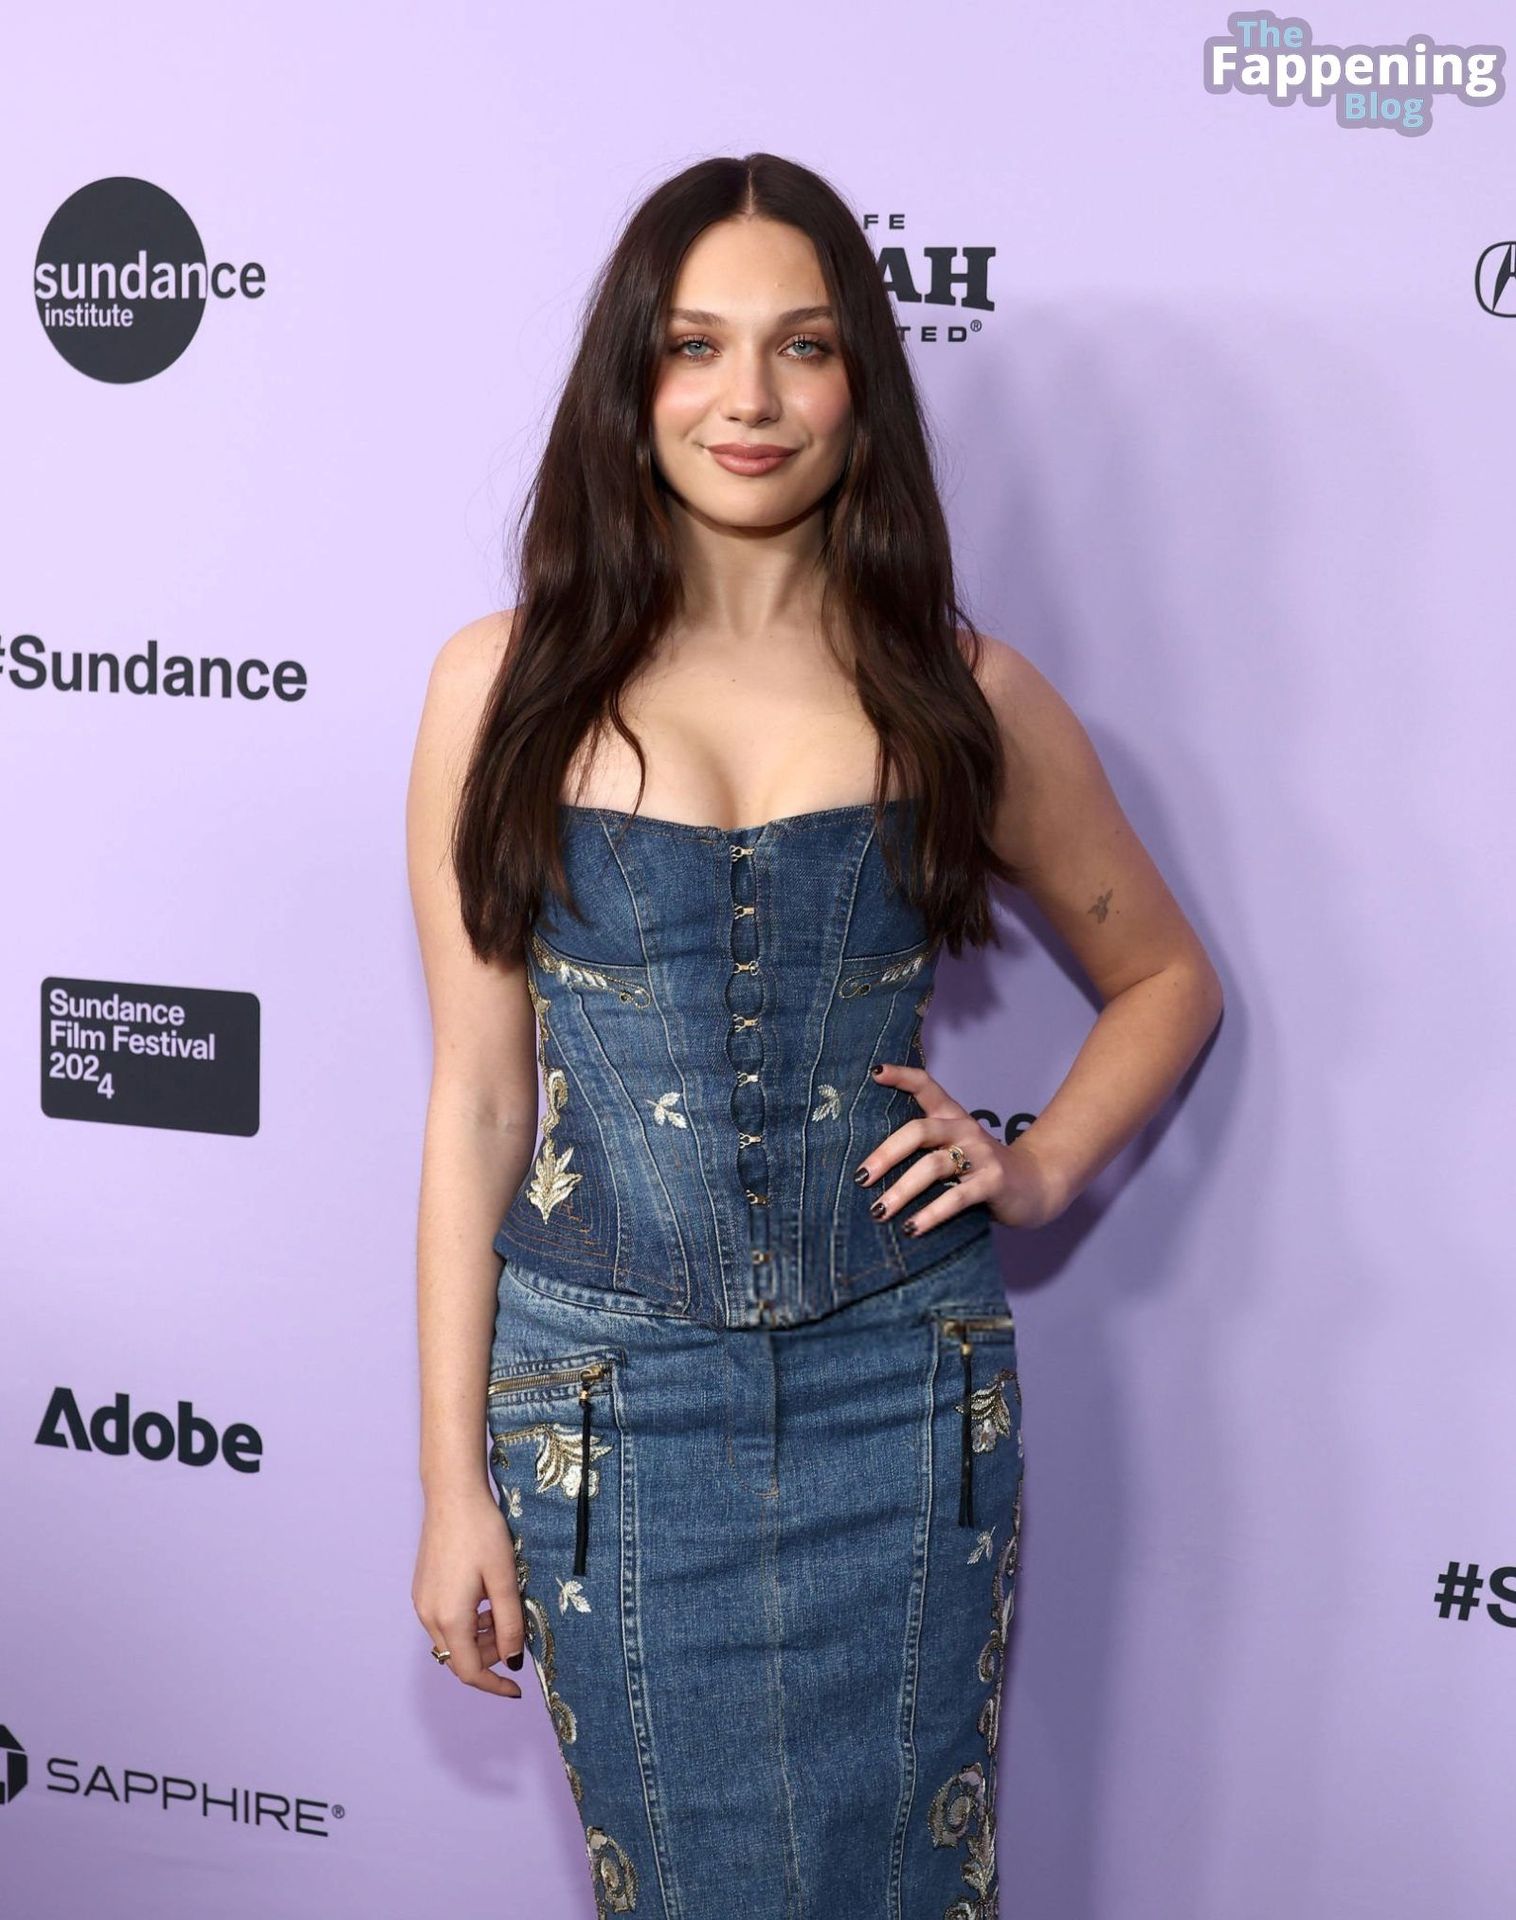 Maddie Ziegler Flaunts Her Sexy Boobs at the “My Old Ass” Premiere (36 Photos)